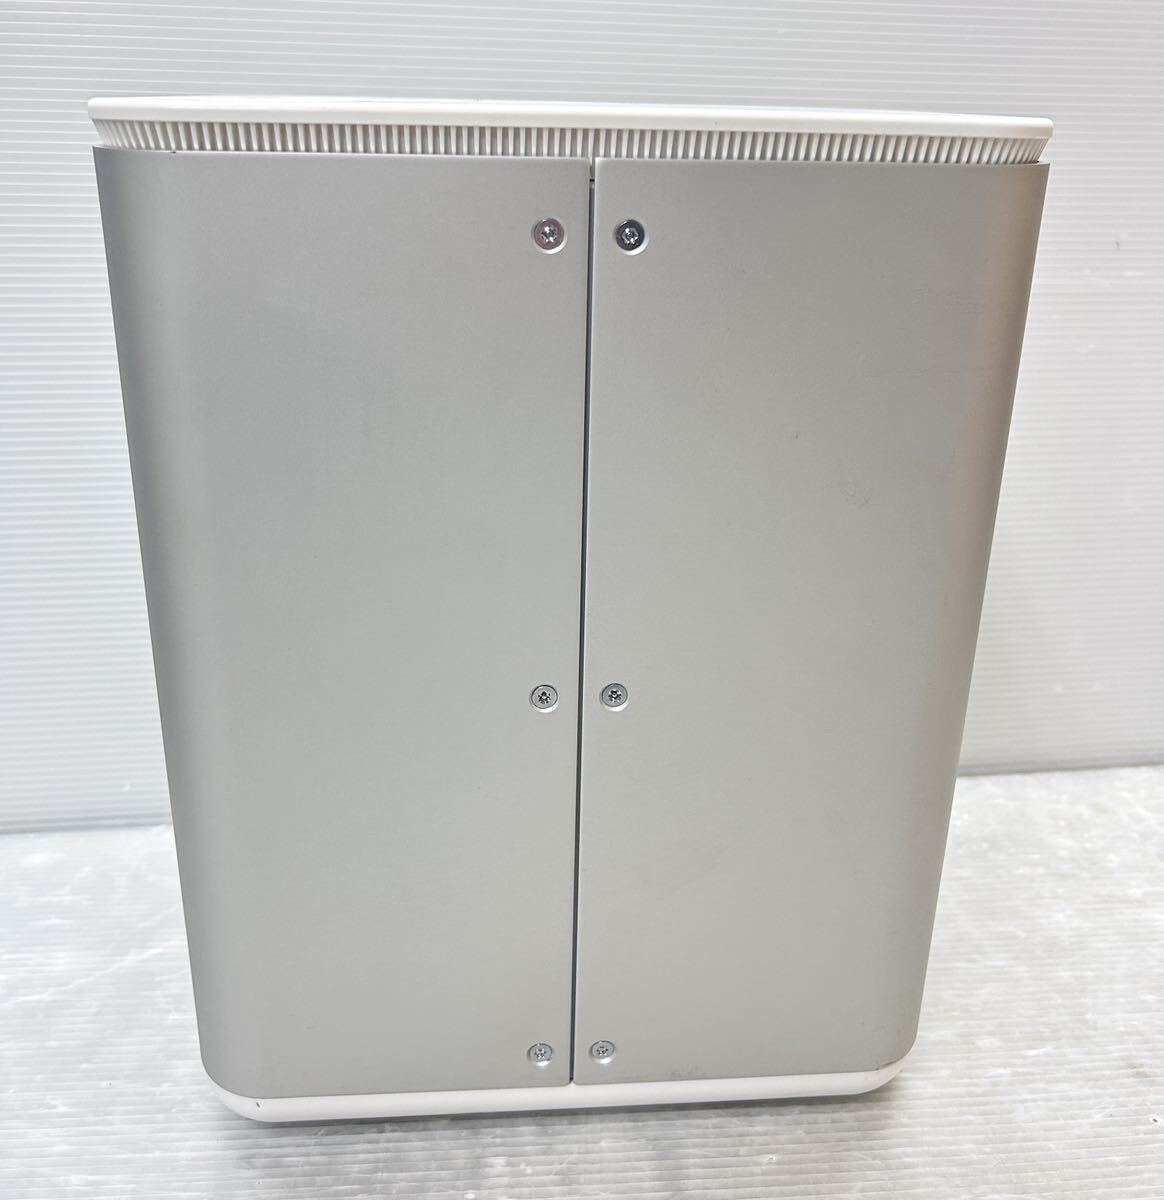 SONY Home energy server (CP-S300E) indoor for AC100V exclusive use frequency 50Hz region limitation power consumption 300W within for emergency power supply operation verification ending secondhand goods B